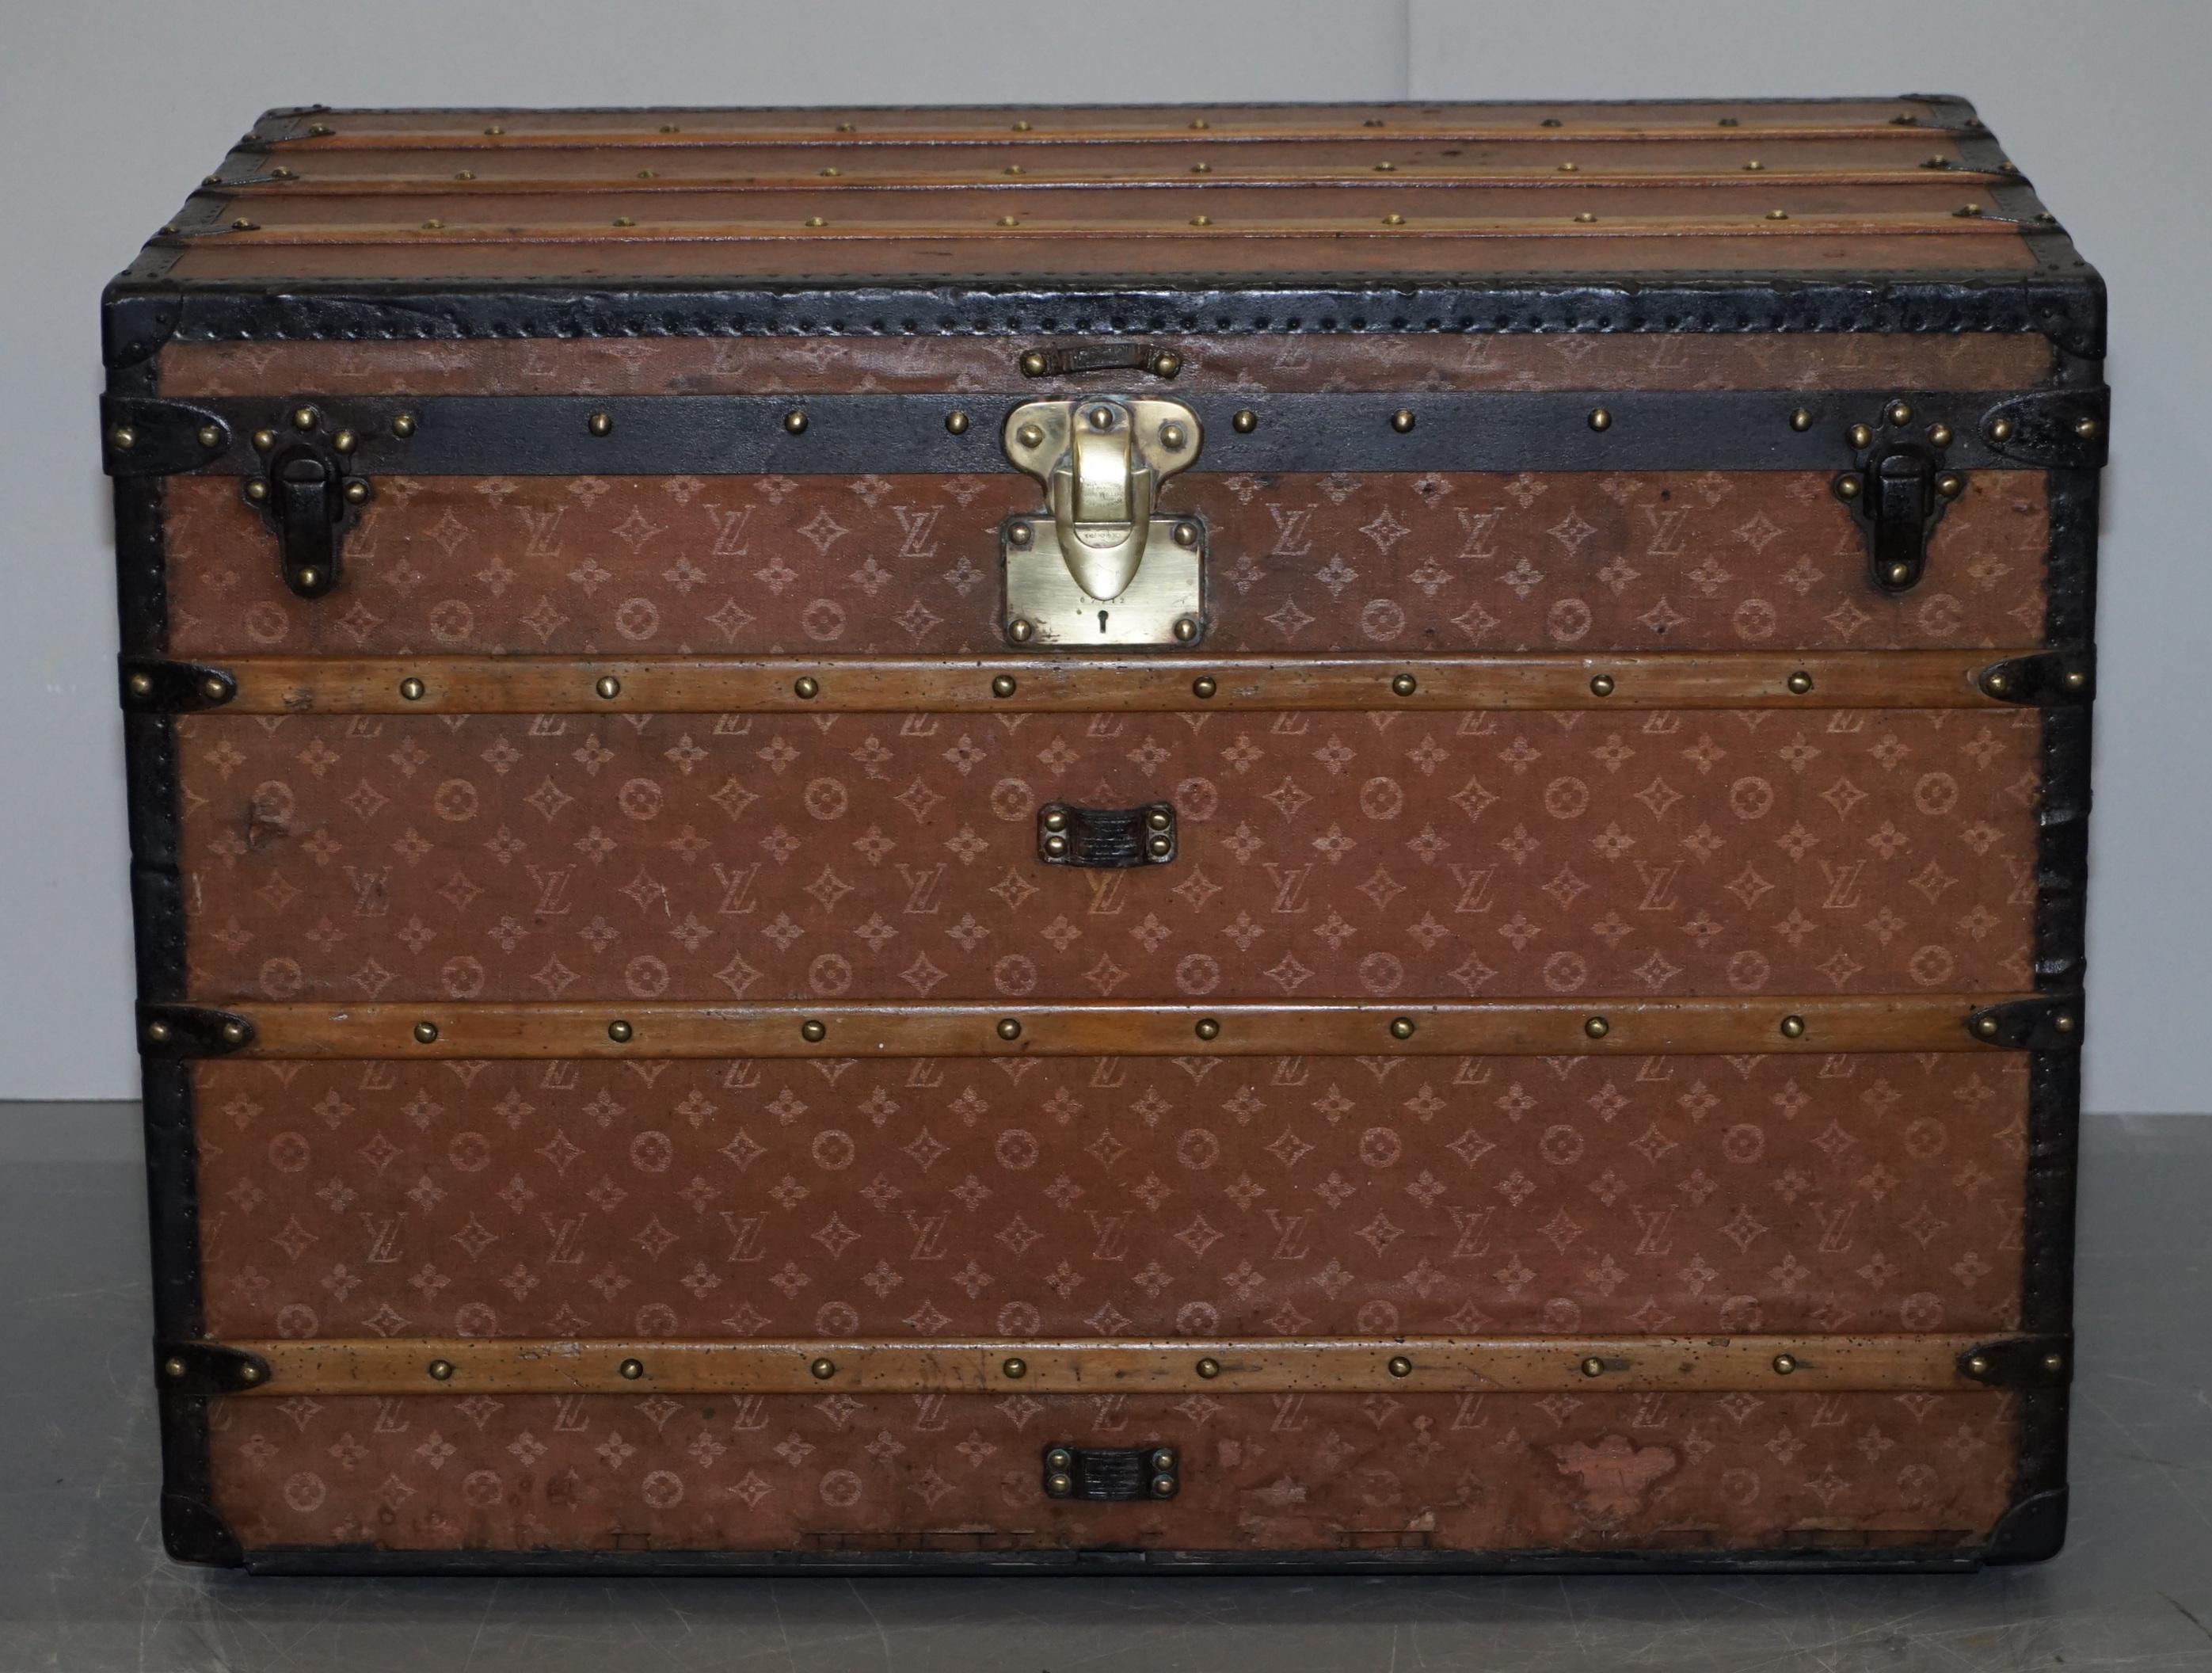 French Fully Restored Extra Large Louis Vuitton Paris 1900 Malle Haute Steamer Trunk